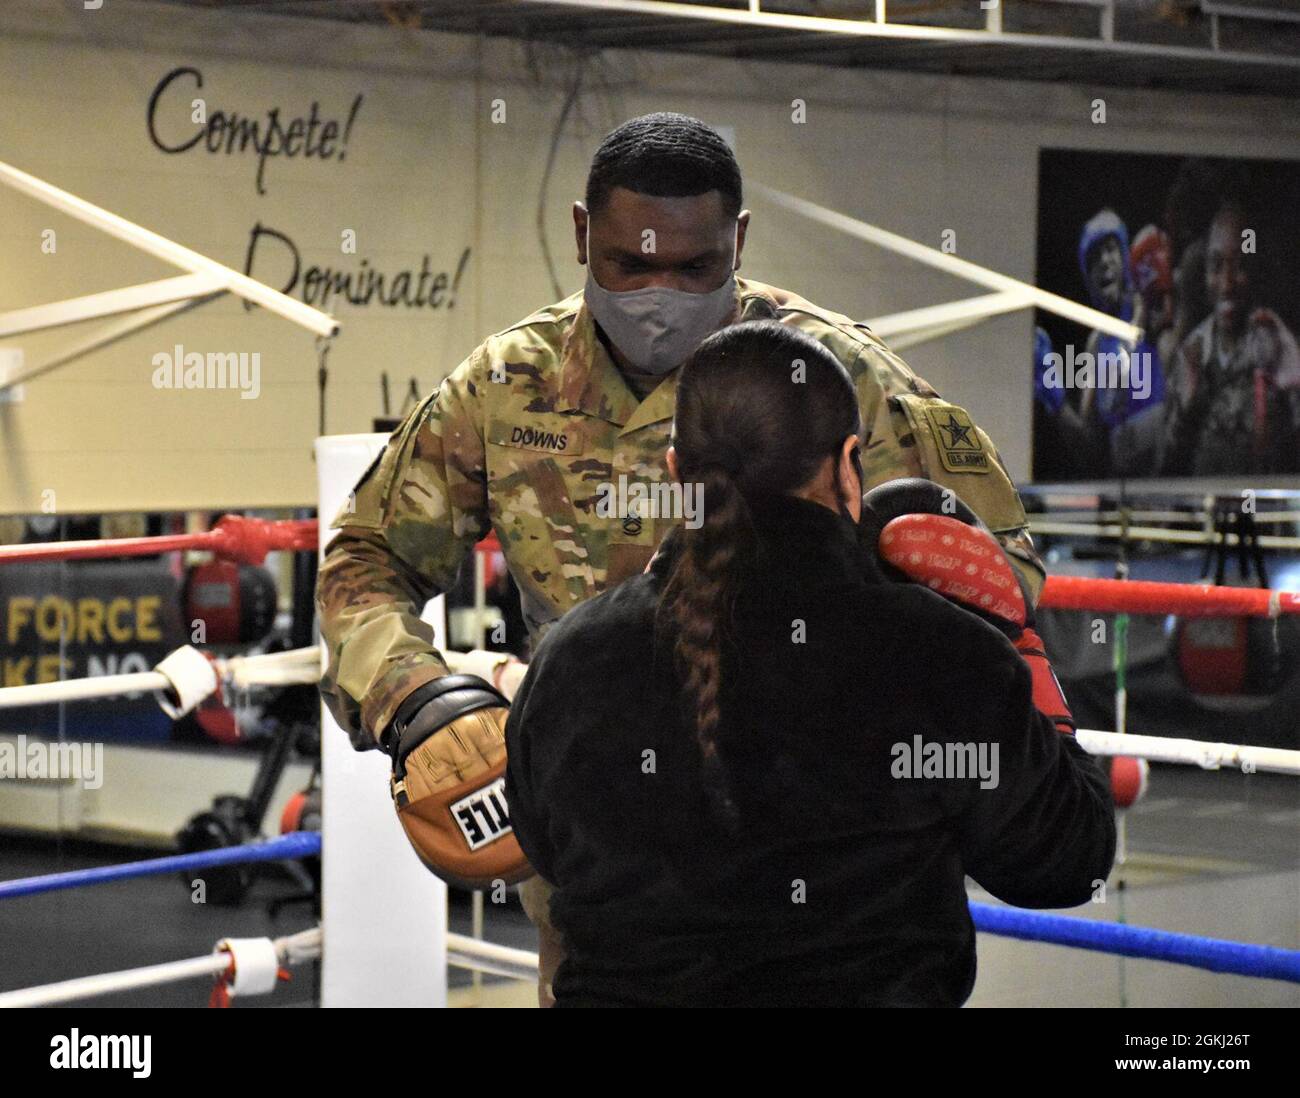 Erika Torres, social media specialist, Phoenix Recruiting Battalion, engages Sgt. 1st Class Christopher Downs, head boxing coach, World Class Athlete Program, with training punches during a demonstration with the Army Boxing World Class Athlete team, April 28, Fort Carson, Colo. Stock Photo